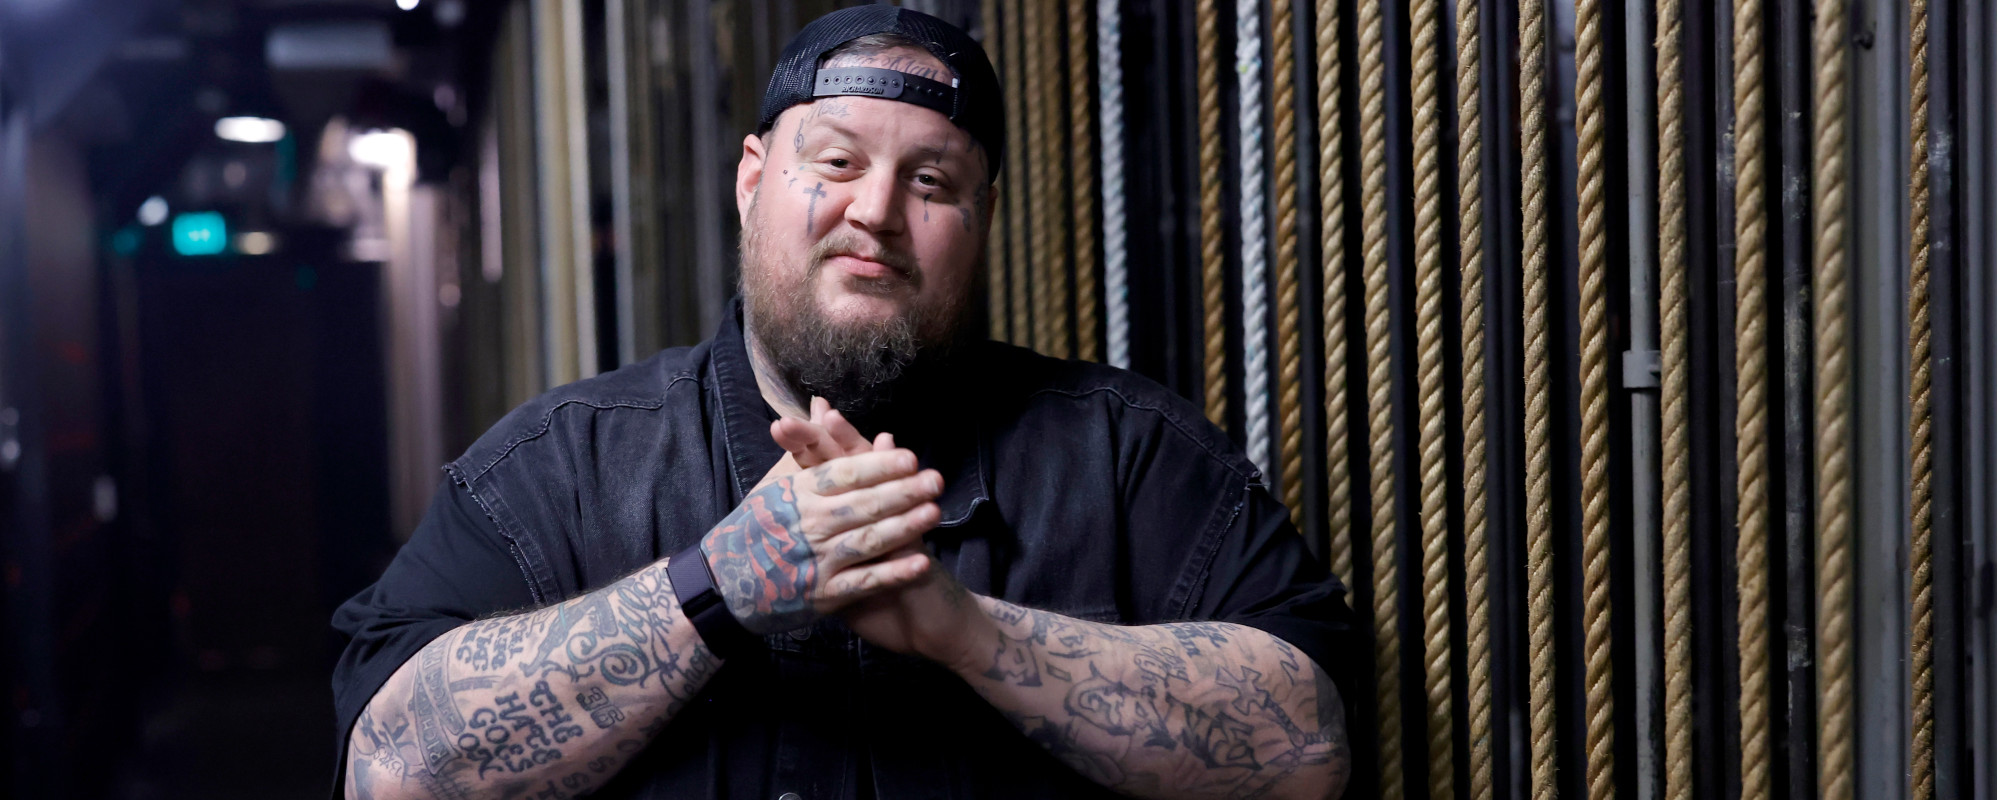 Jelly Roll Would Bring Mixtapes to Drug Deals: “It Was Like My Business Card”